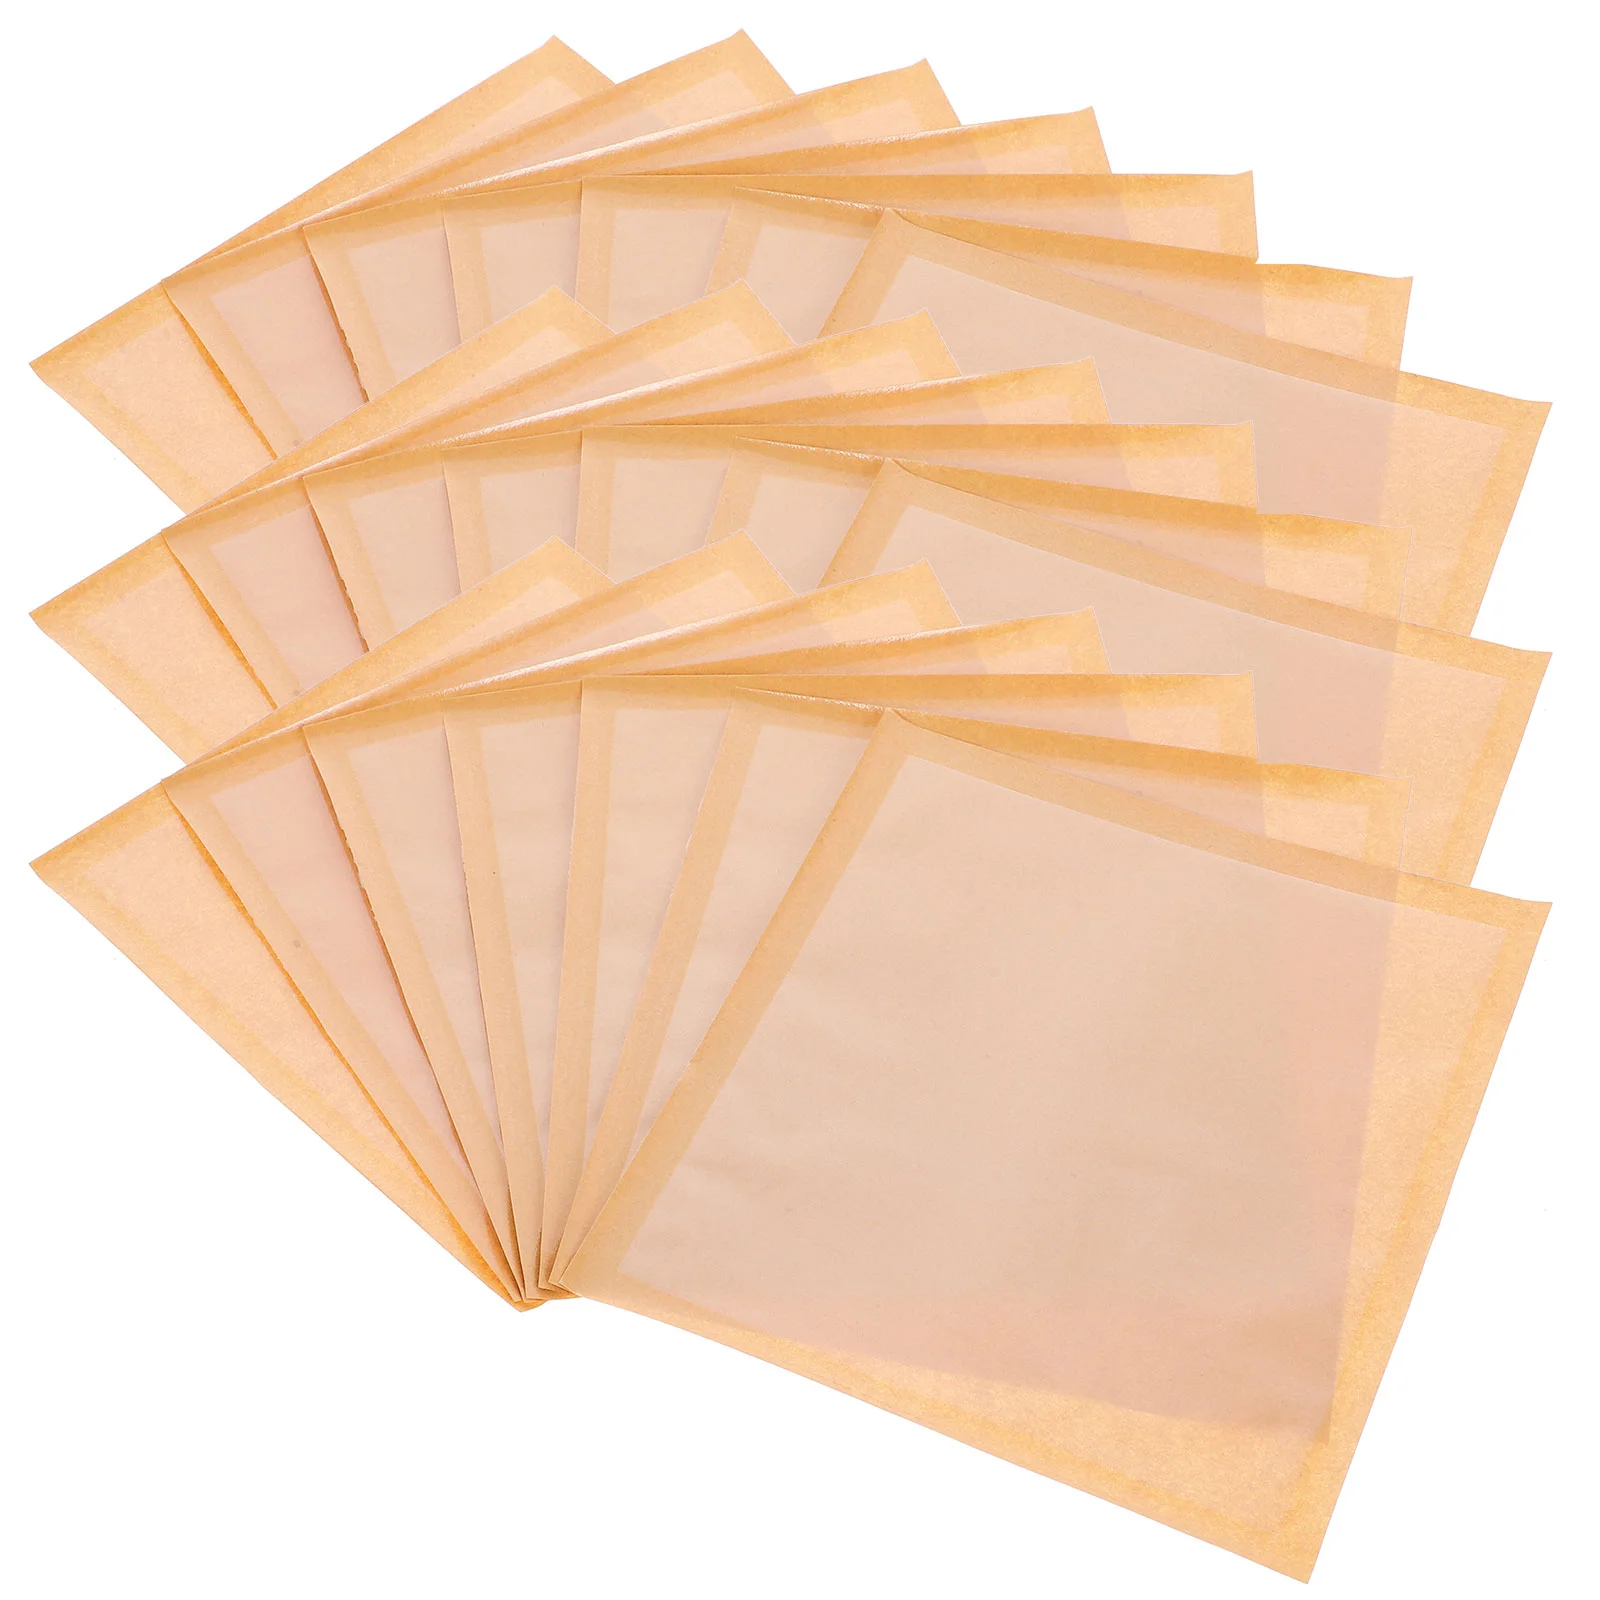 

100 Pcs Packing Bag Doughnut Heat Seal Bags for Cookies Bread Sandwich Bakery with Window Donut Kraft Paper